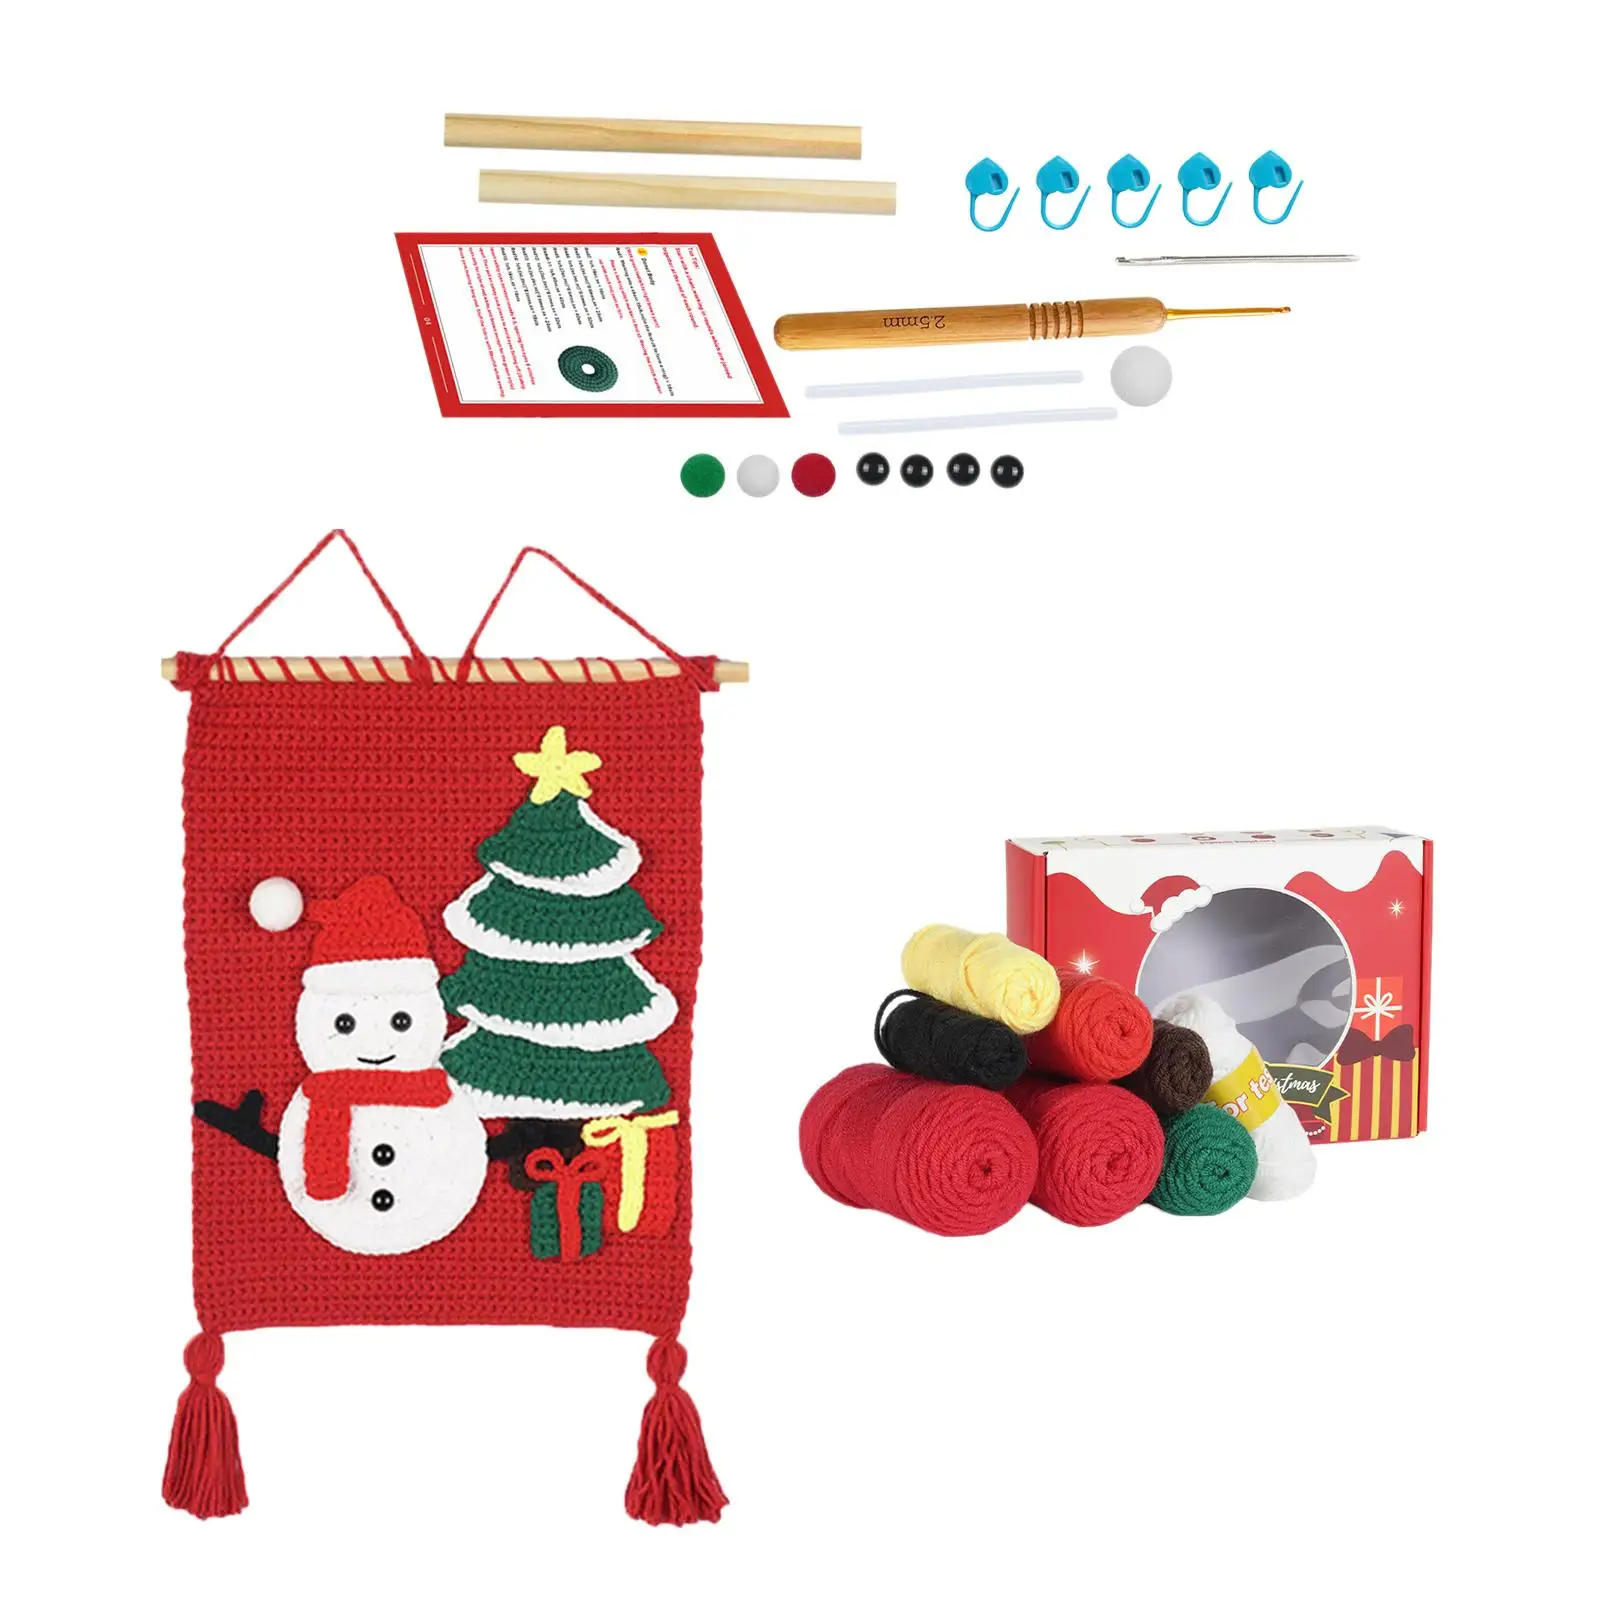 Christmas Crochet Kits Make Your Own Doll for Beginners for Christmas Gift Birthday Gift Porches Fireplaces Christmas Tree